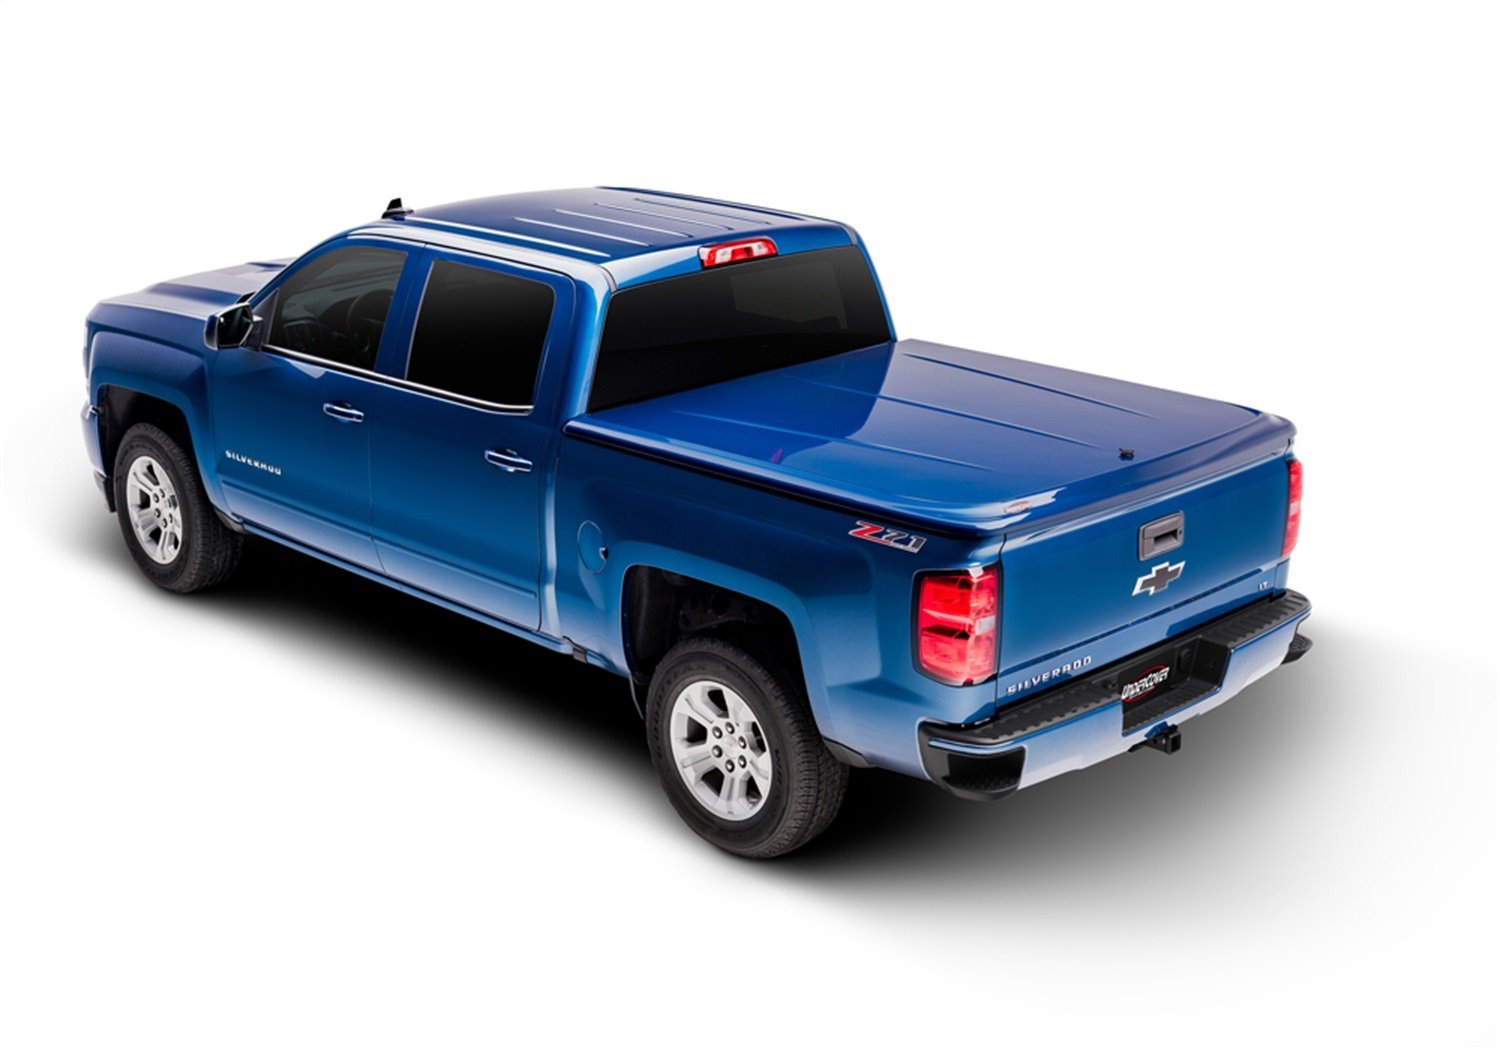 UC2206L-YZ LUX Hard Non-Folding Cover, Fits Select Ford F-150 5'7" Bed Crew (Includes Lightning) YZ Oxford White